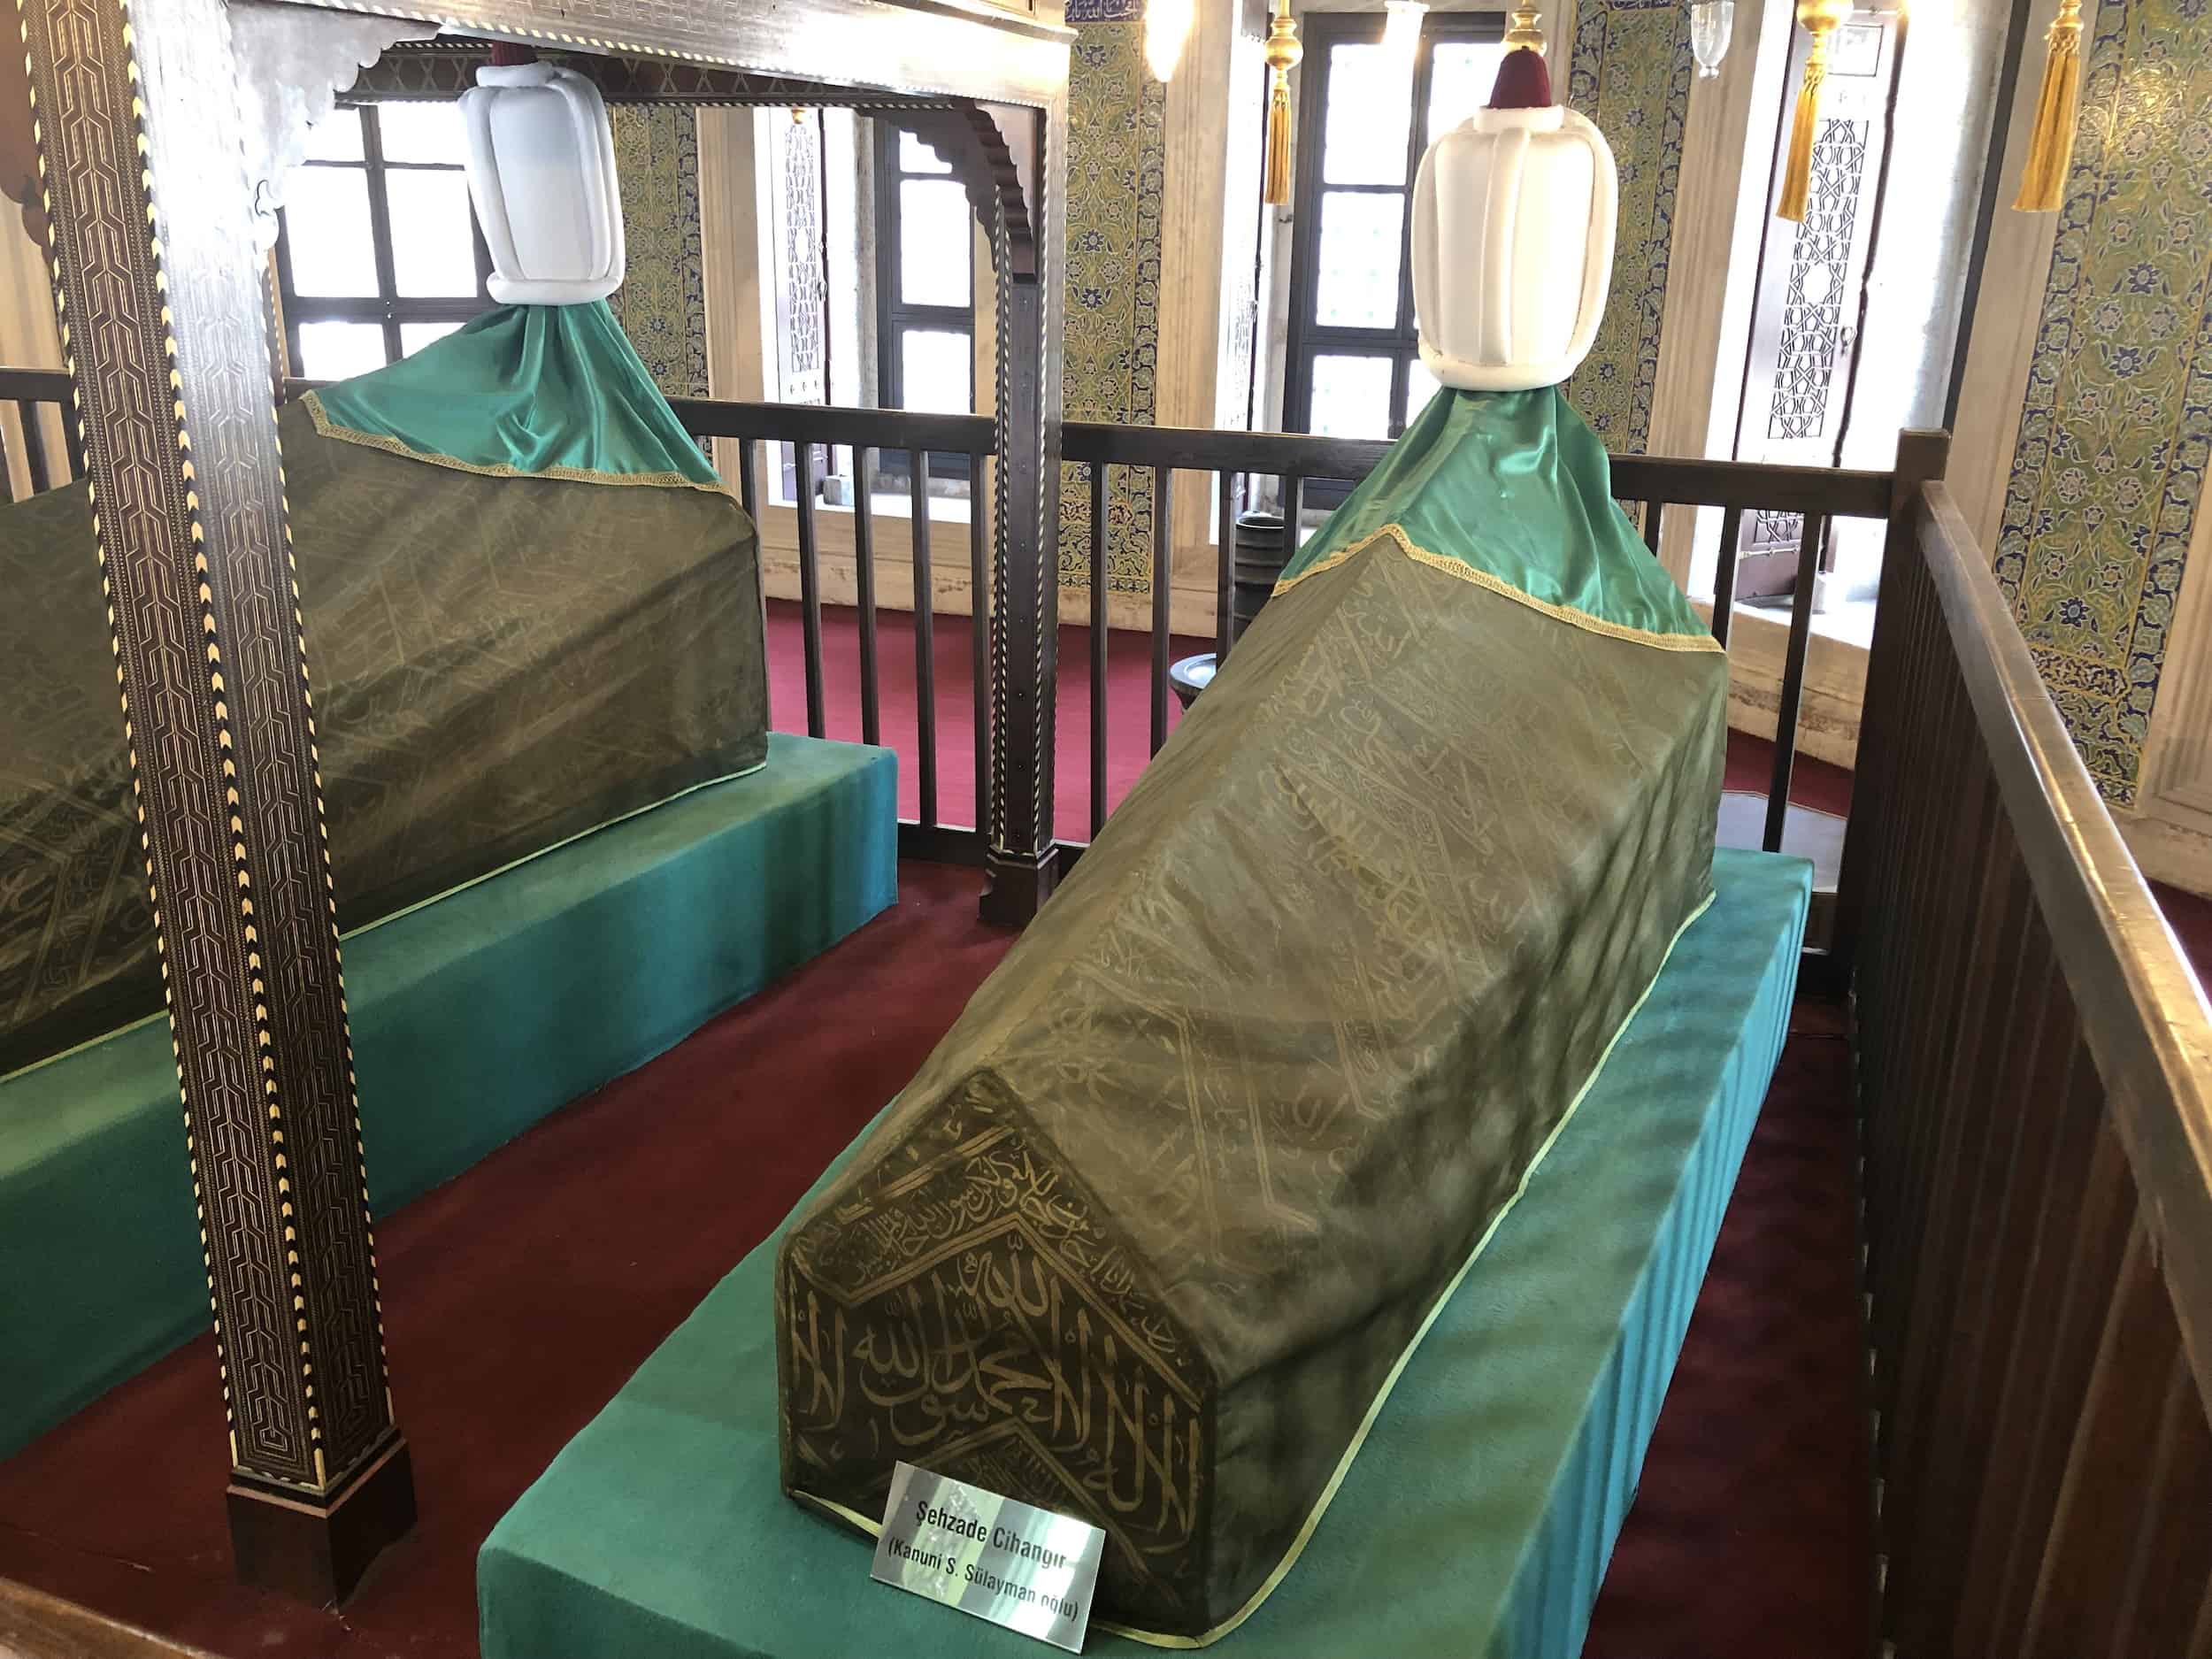 Sarcophagus of Şehzade Cihangir in the Tomb of Şehzade Mehmed at the Şehzade Mosque Complex in Istanbul, Turkey